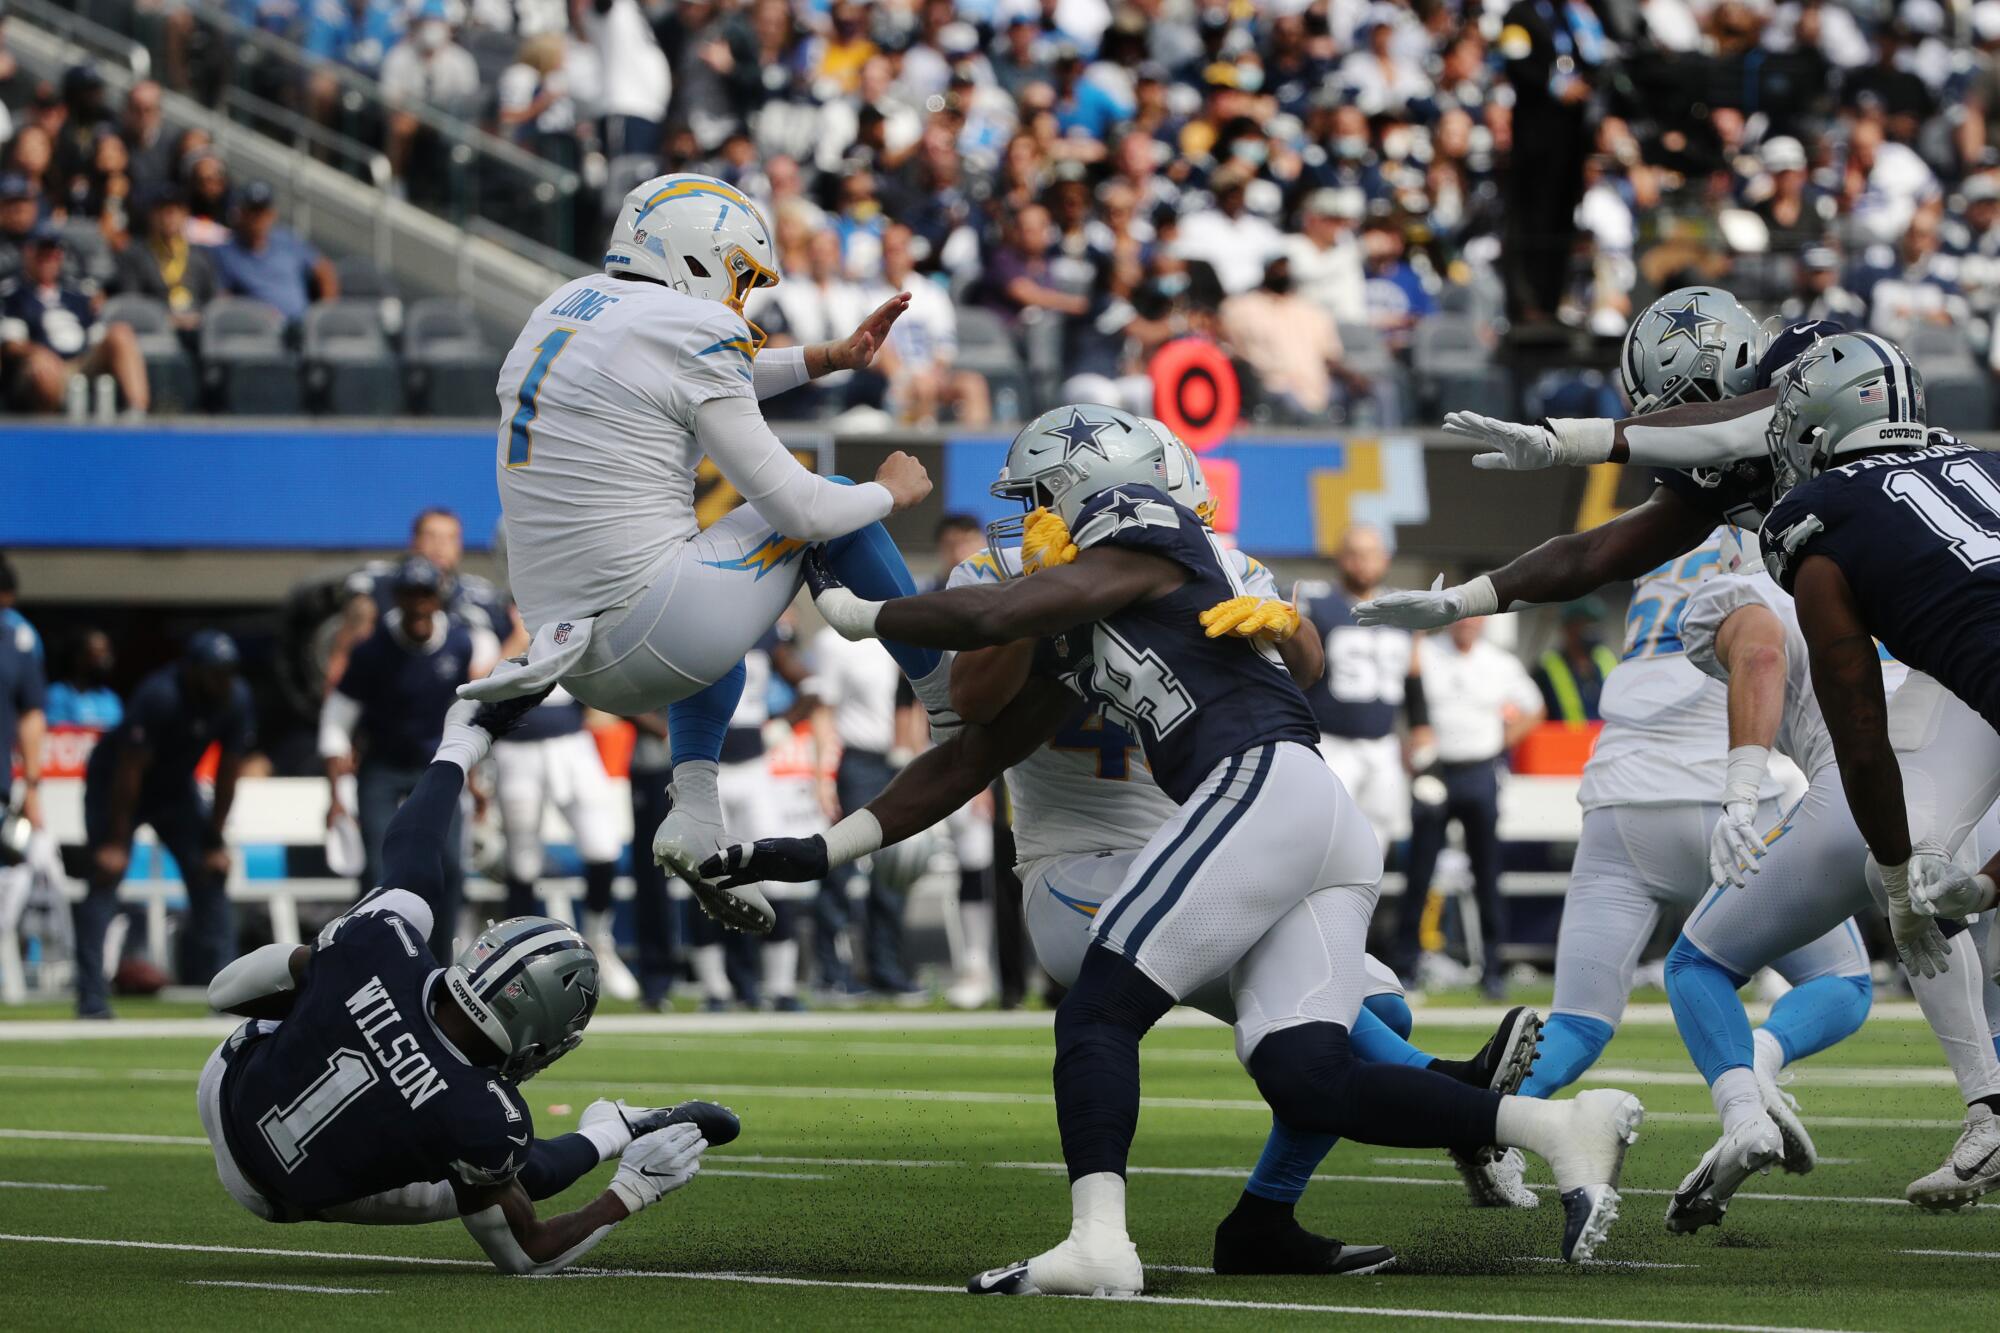 Dallas Cowboys defensive end Azur Kamara is penalized for roughing Chargers punter Ty Long.